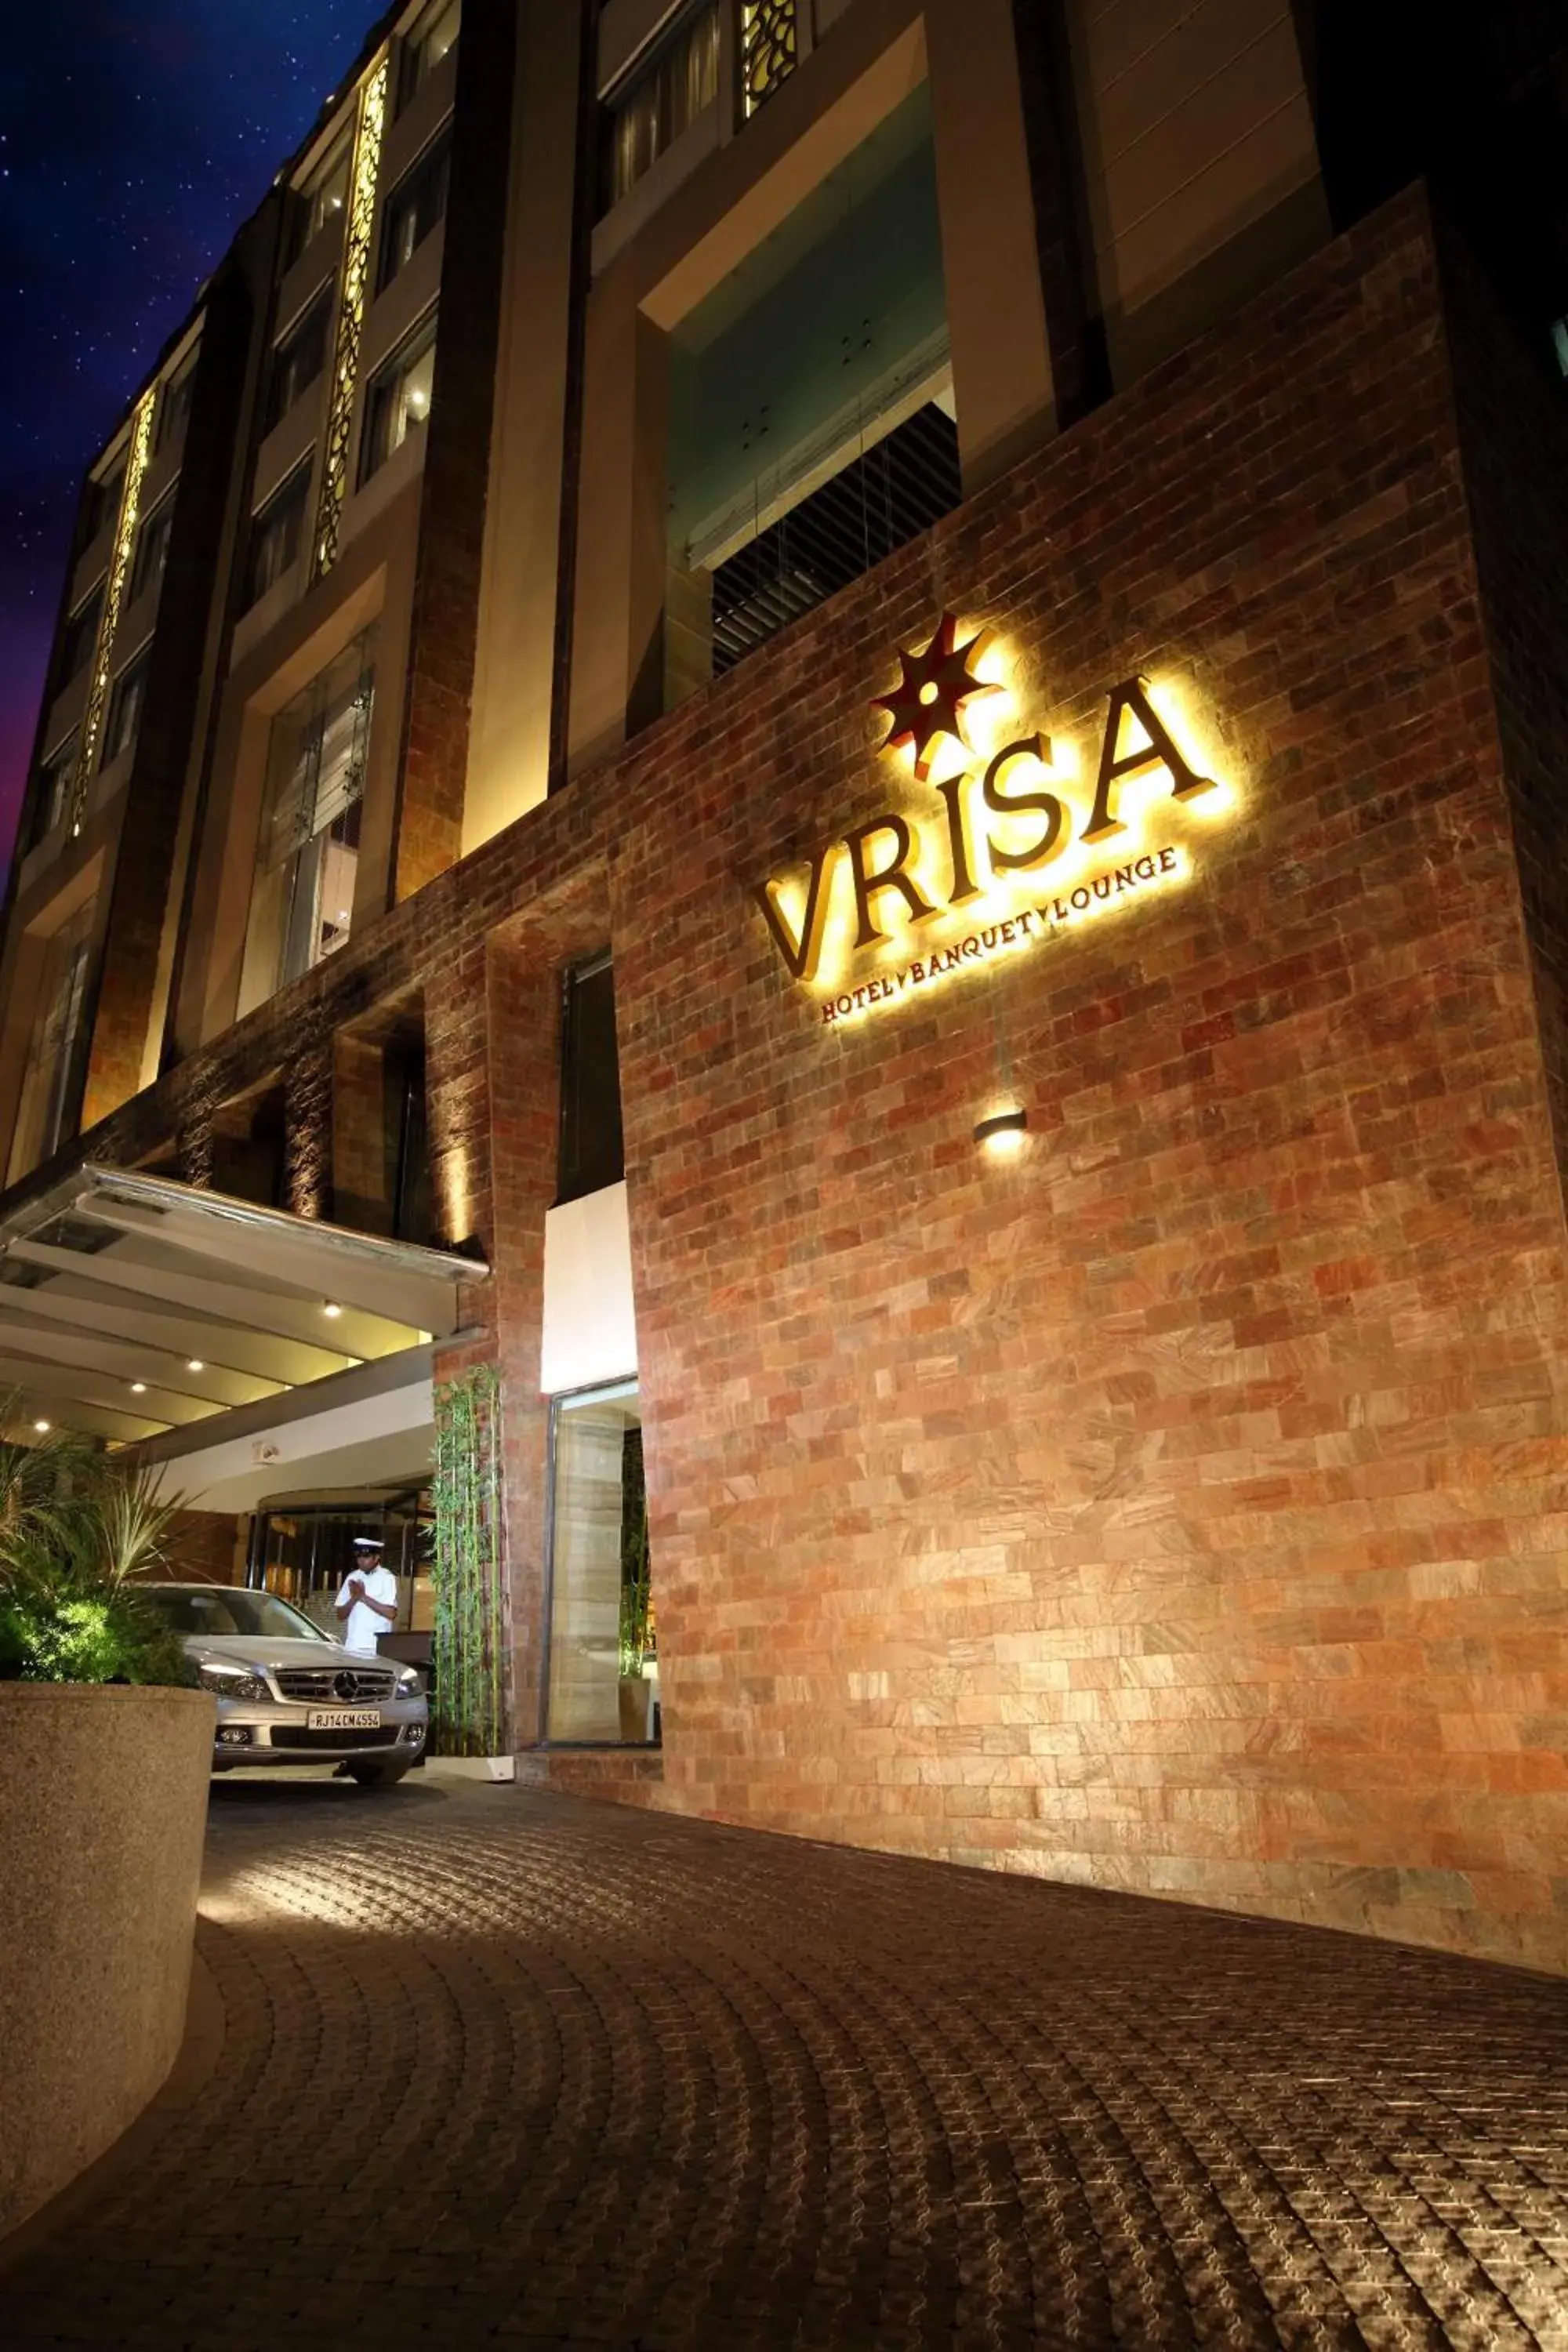 Area and facilities in Hotel Vrisa